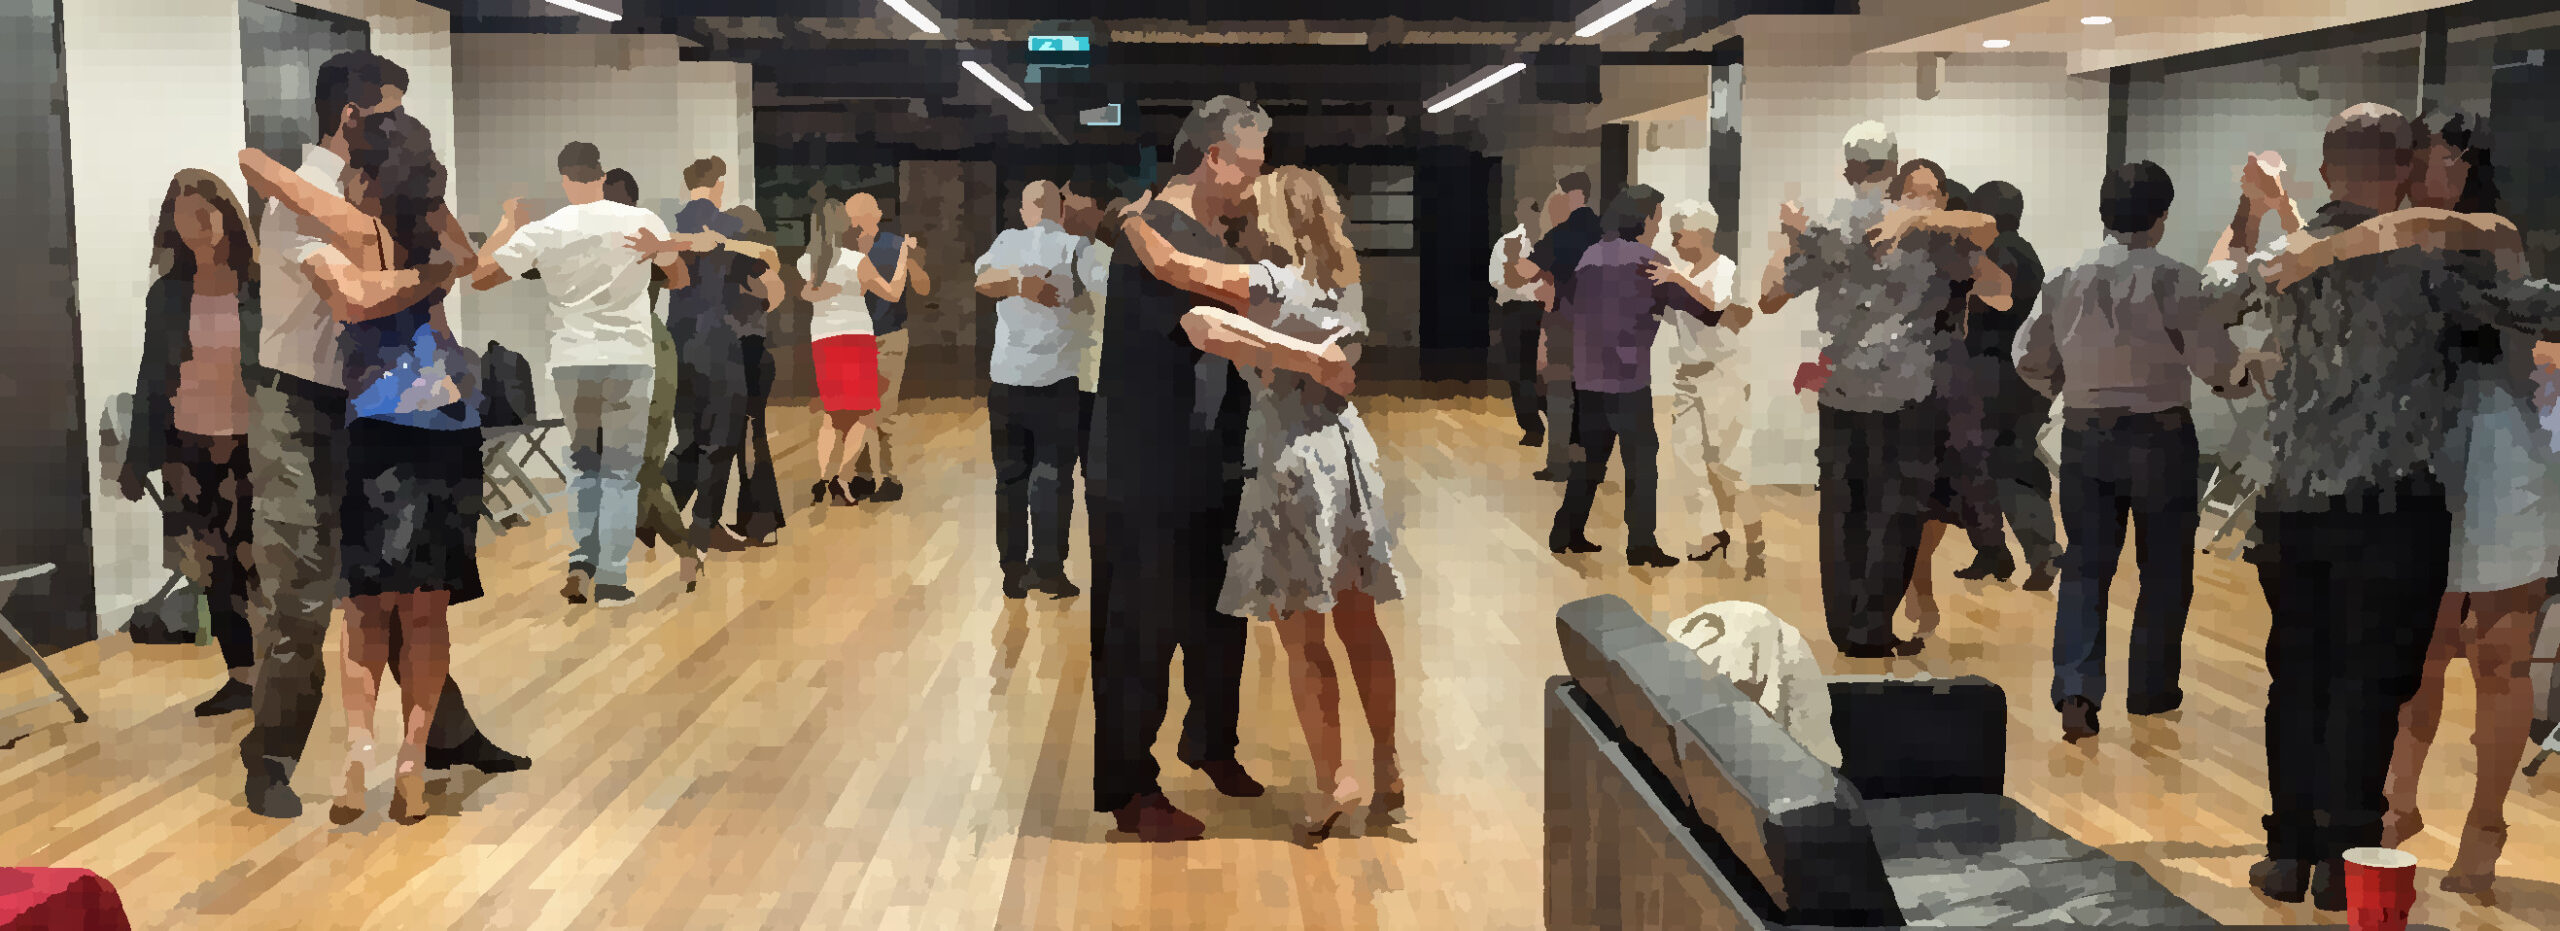 Couples dancing tango at Synergy practica on Sunday